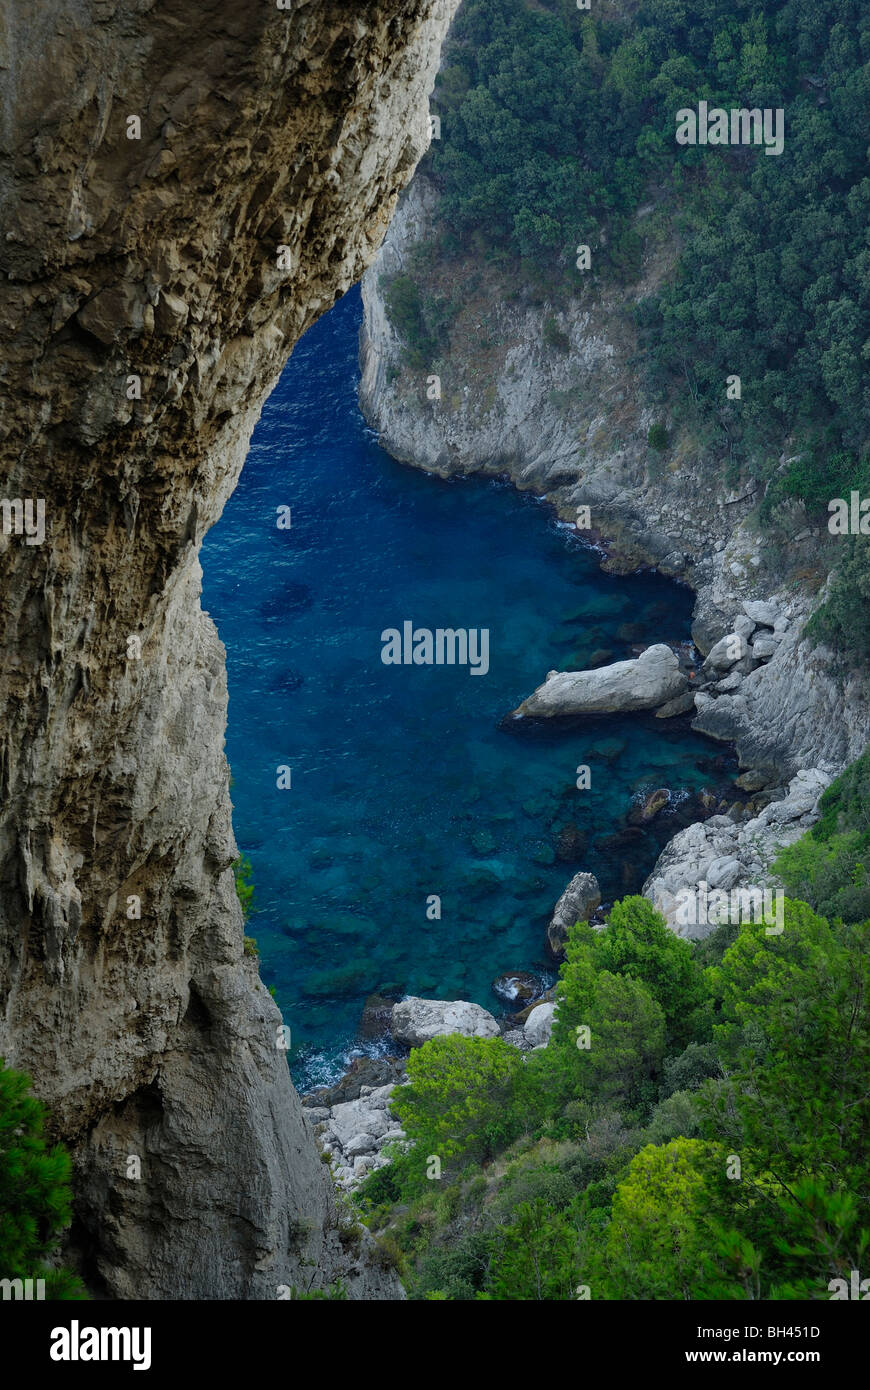 The Arco Naturale (Arch Natural) on Capri, Italy, as viewed from nearby  viewing area Stock Photo - Alamy